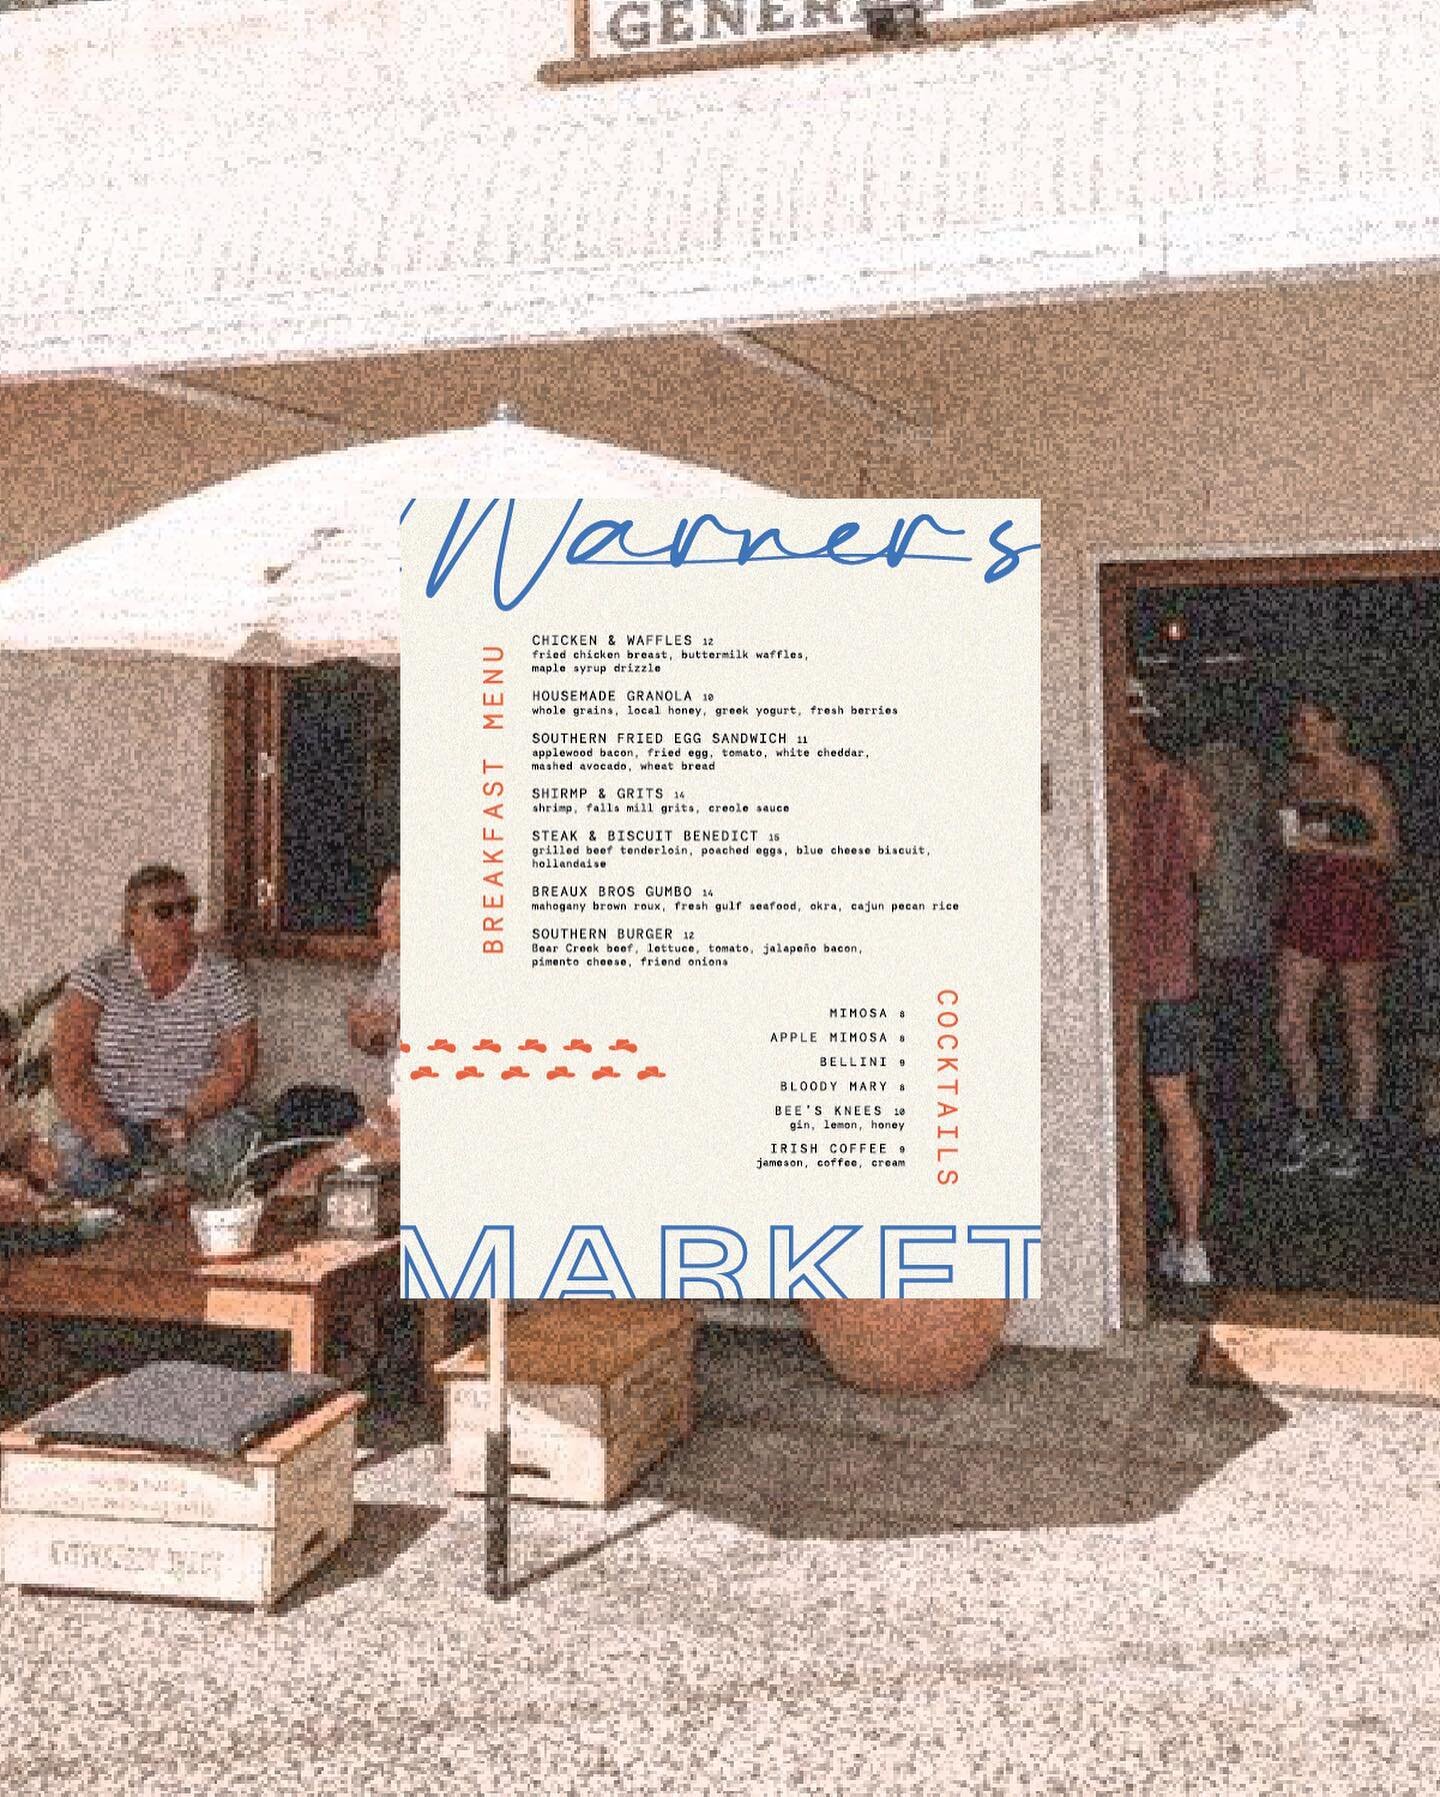 Sharing the rest of the Warner&rsquo;s Market brand - specifically the menu for their Southern Breakfast fare plus a taste of social media. Restaurants are my bread &amp; butter (pun intended 🤪) and I love getting to build out all of the pieces that